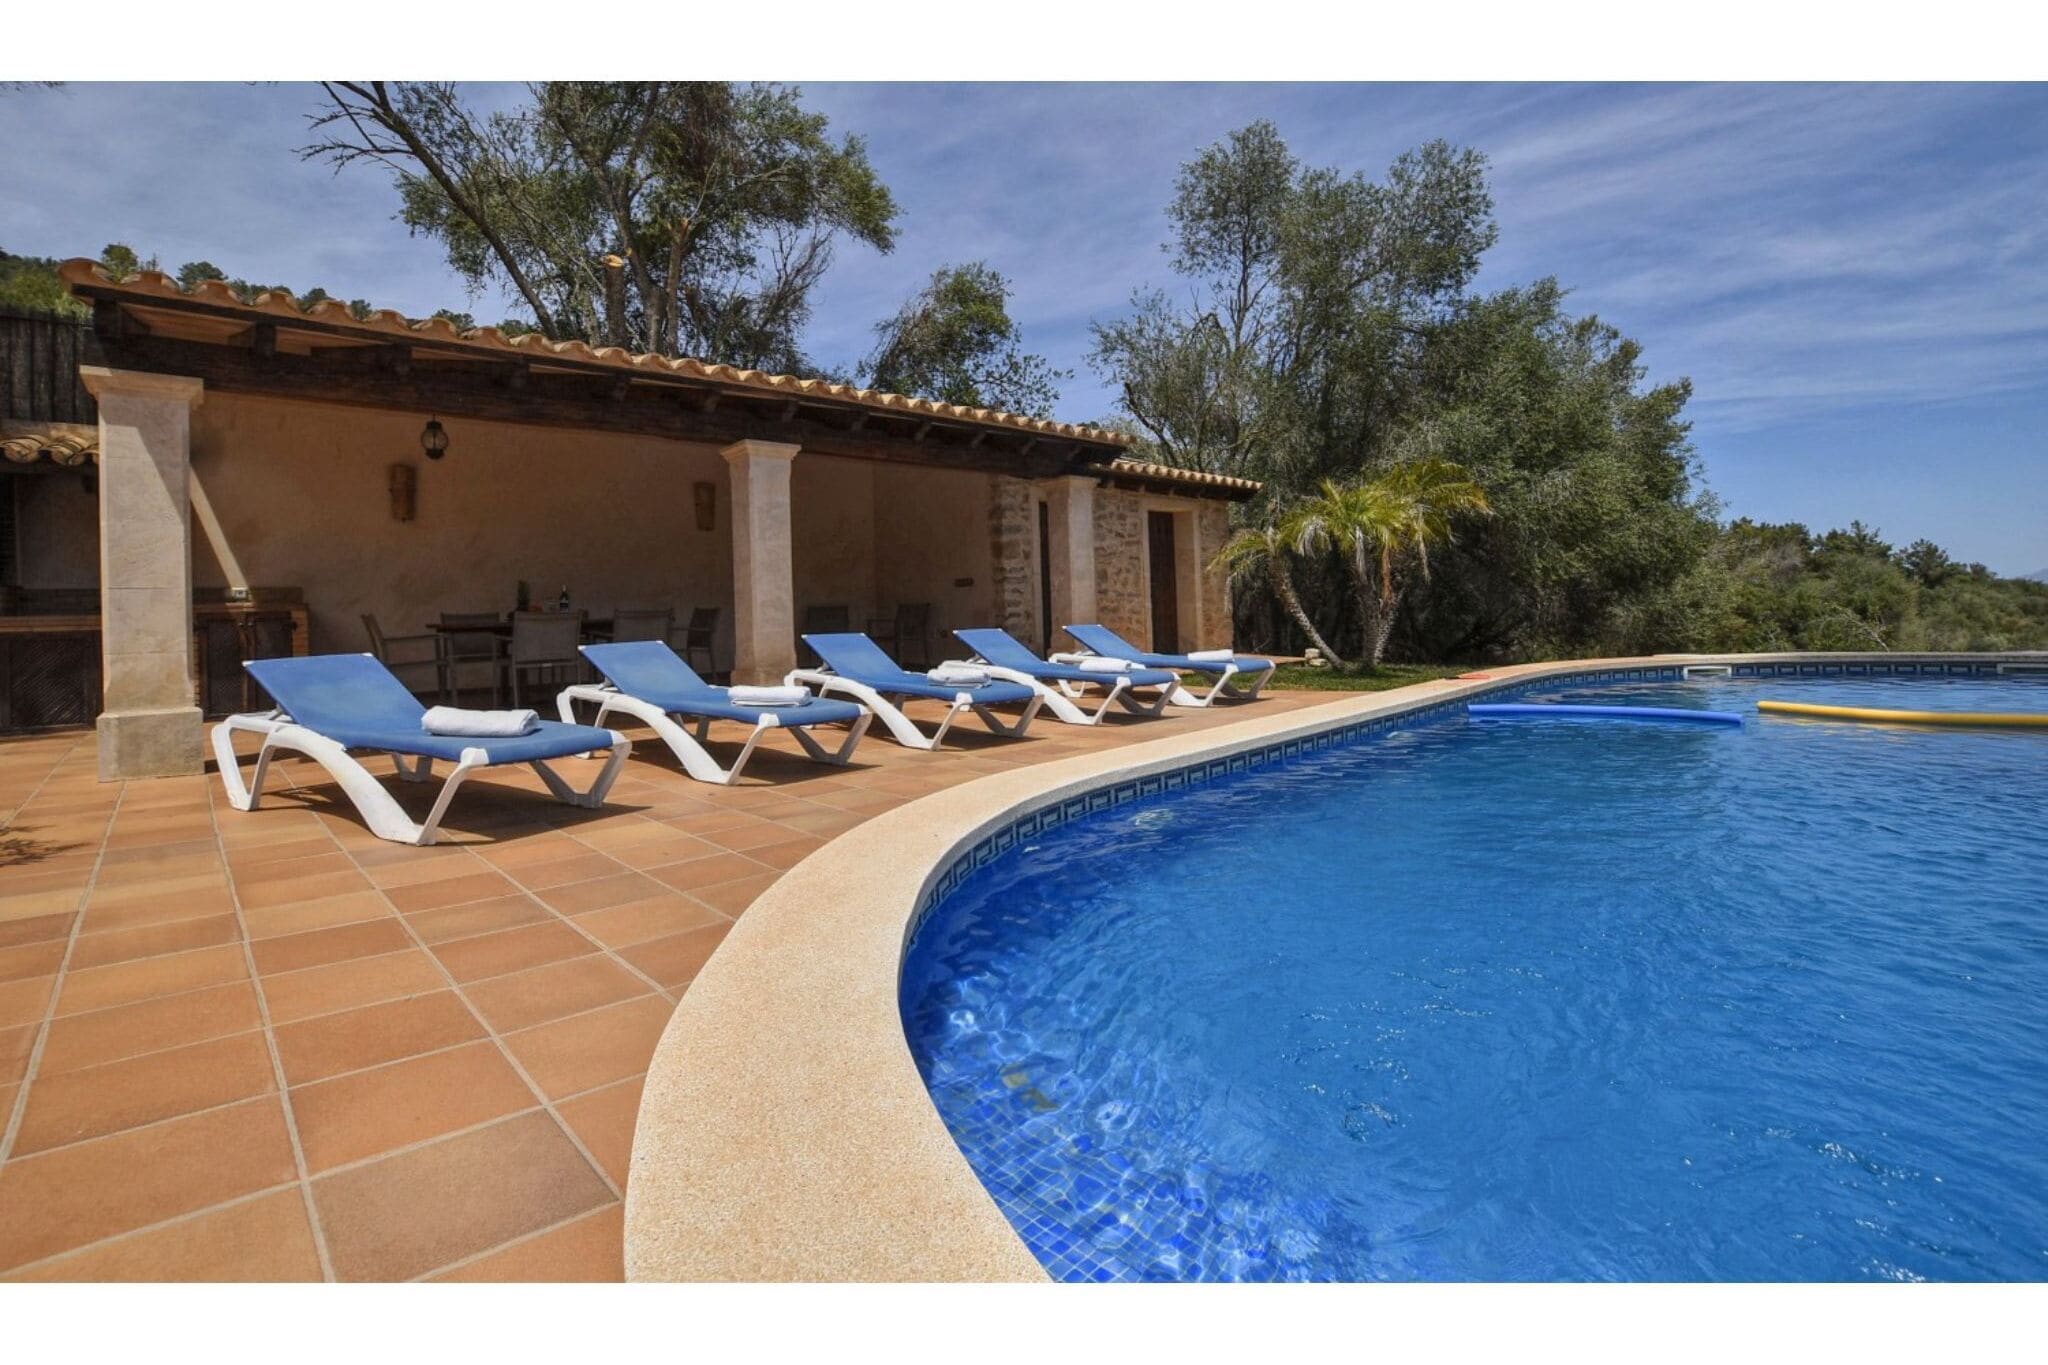 Beautiful country house with pool located in a privileged environment